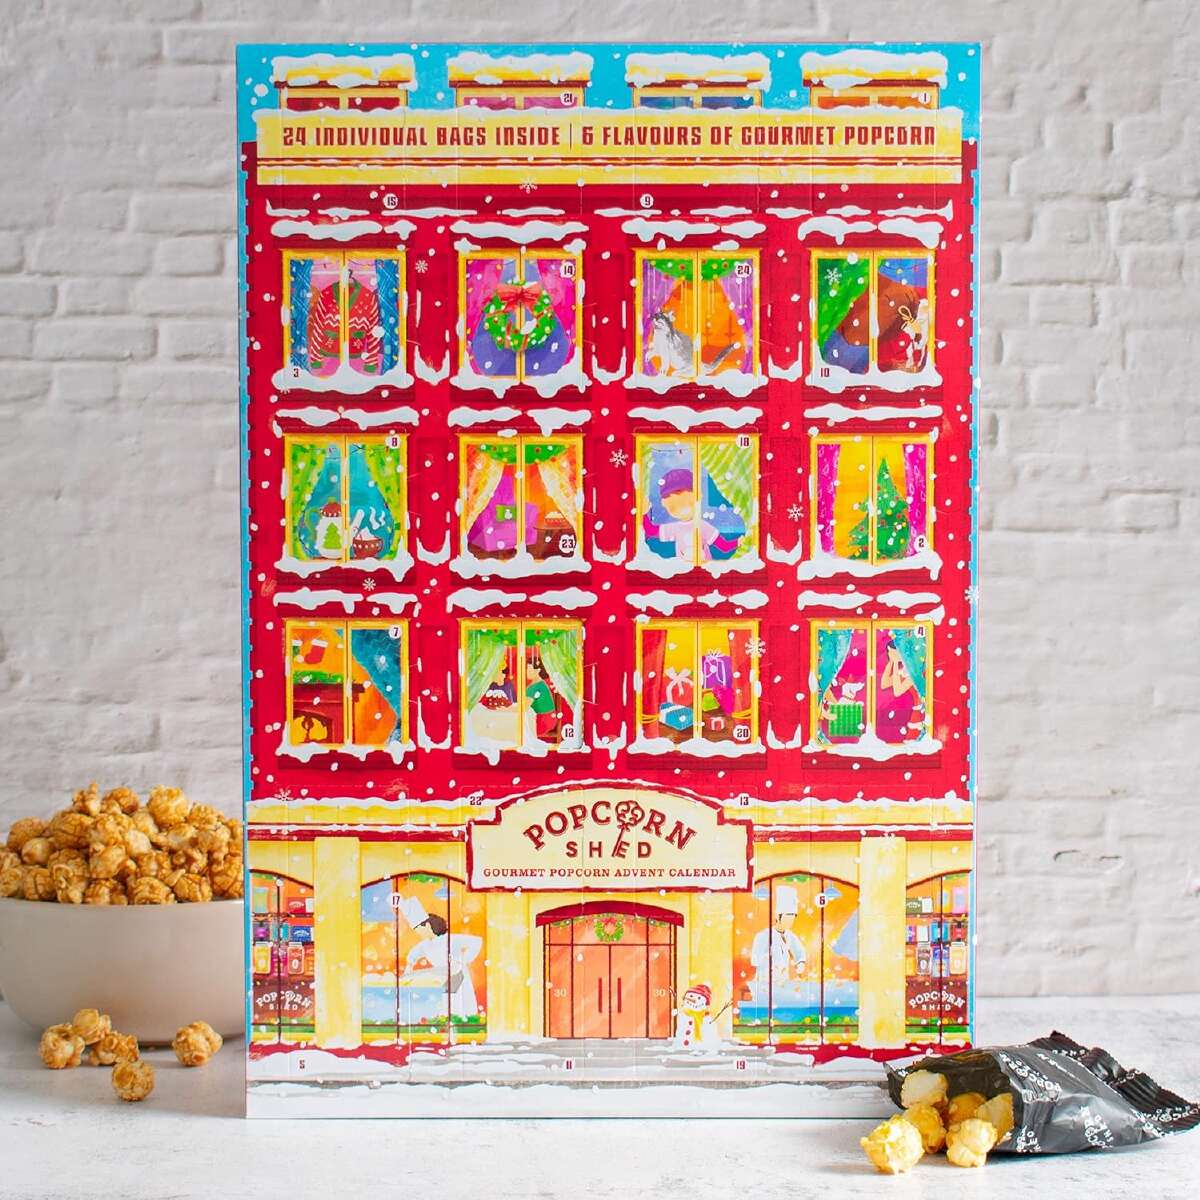 A popcorn advent calendar shaped like a large, fancy Christmas townhouse against a white brick wall background and accessorized with a bowl and opened packages of popcorn.